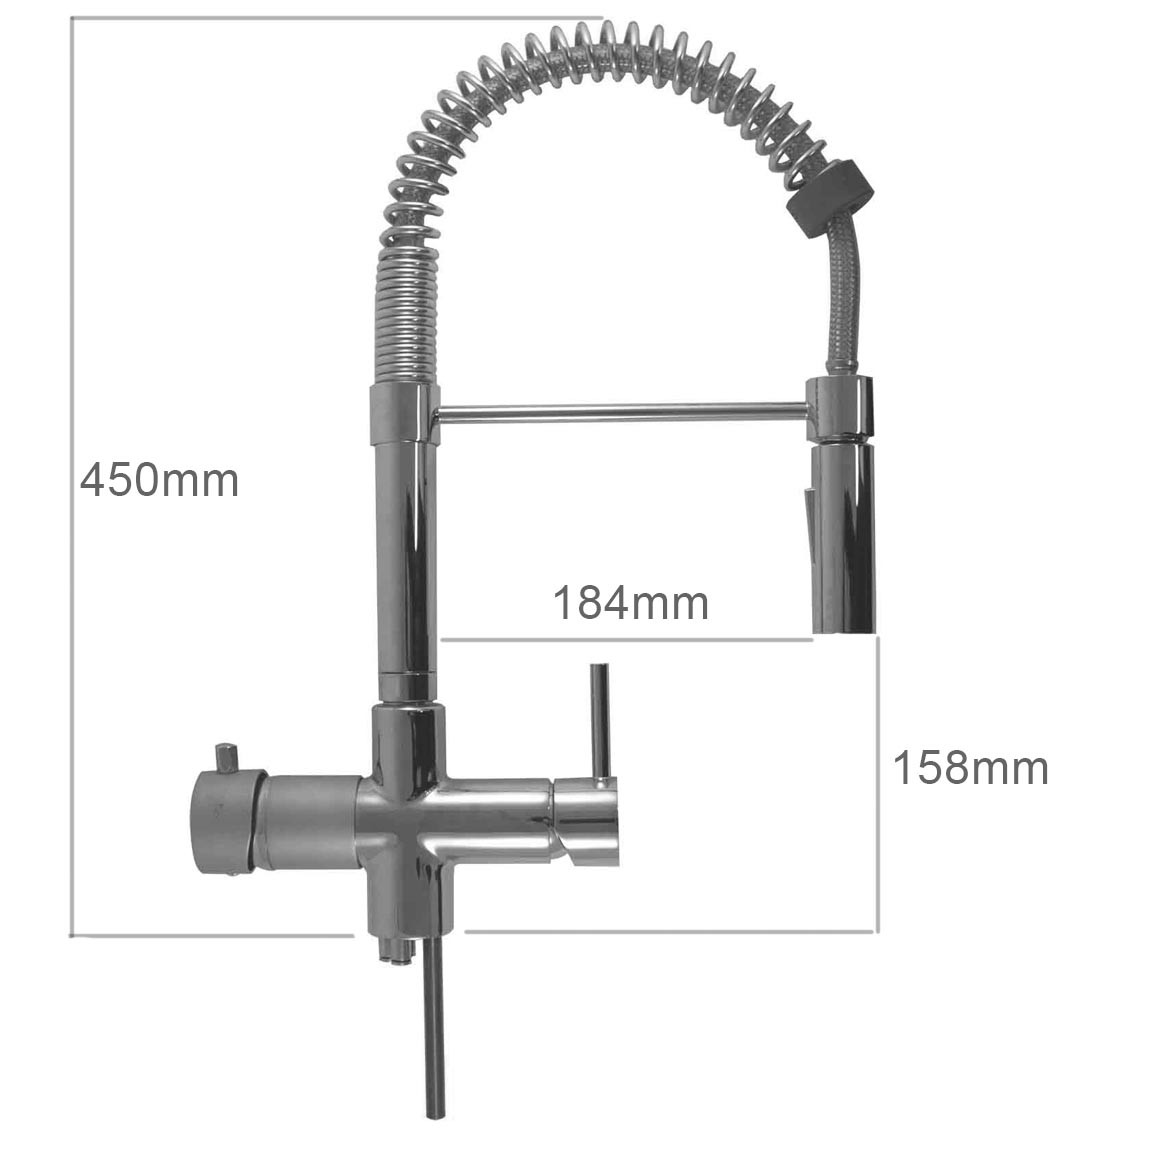 Chrome Adriano five way faucet measures